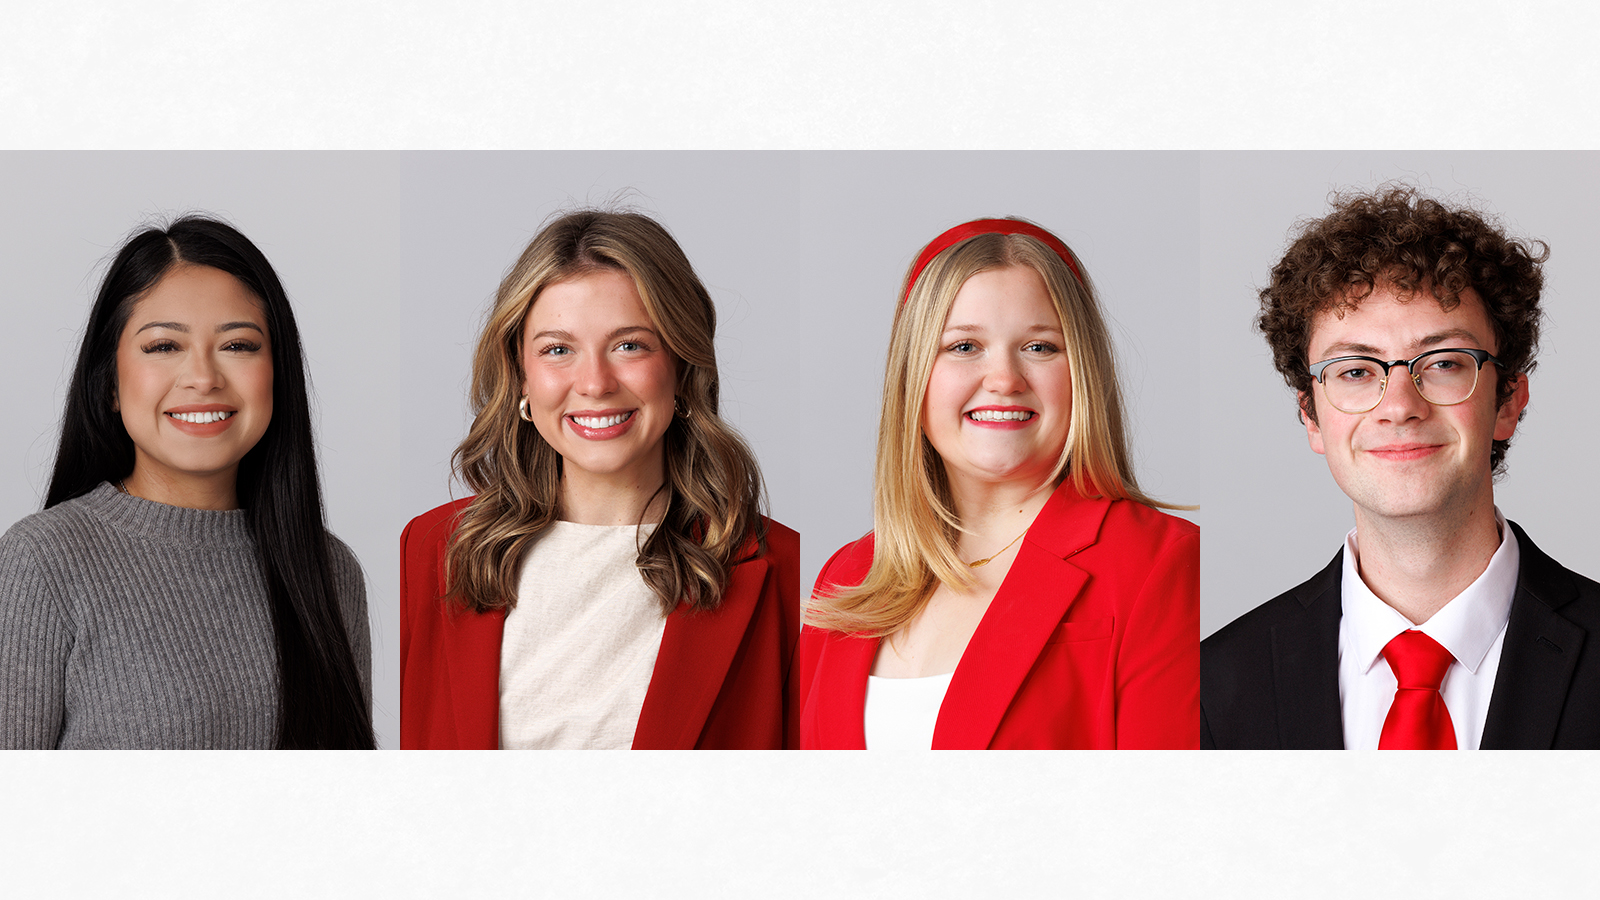 Michelle Garcia-Barillas, Claire Kelly, Makayla Larntz and Jameson Margetts professional headshots on light background